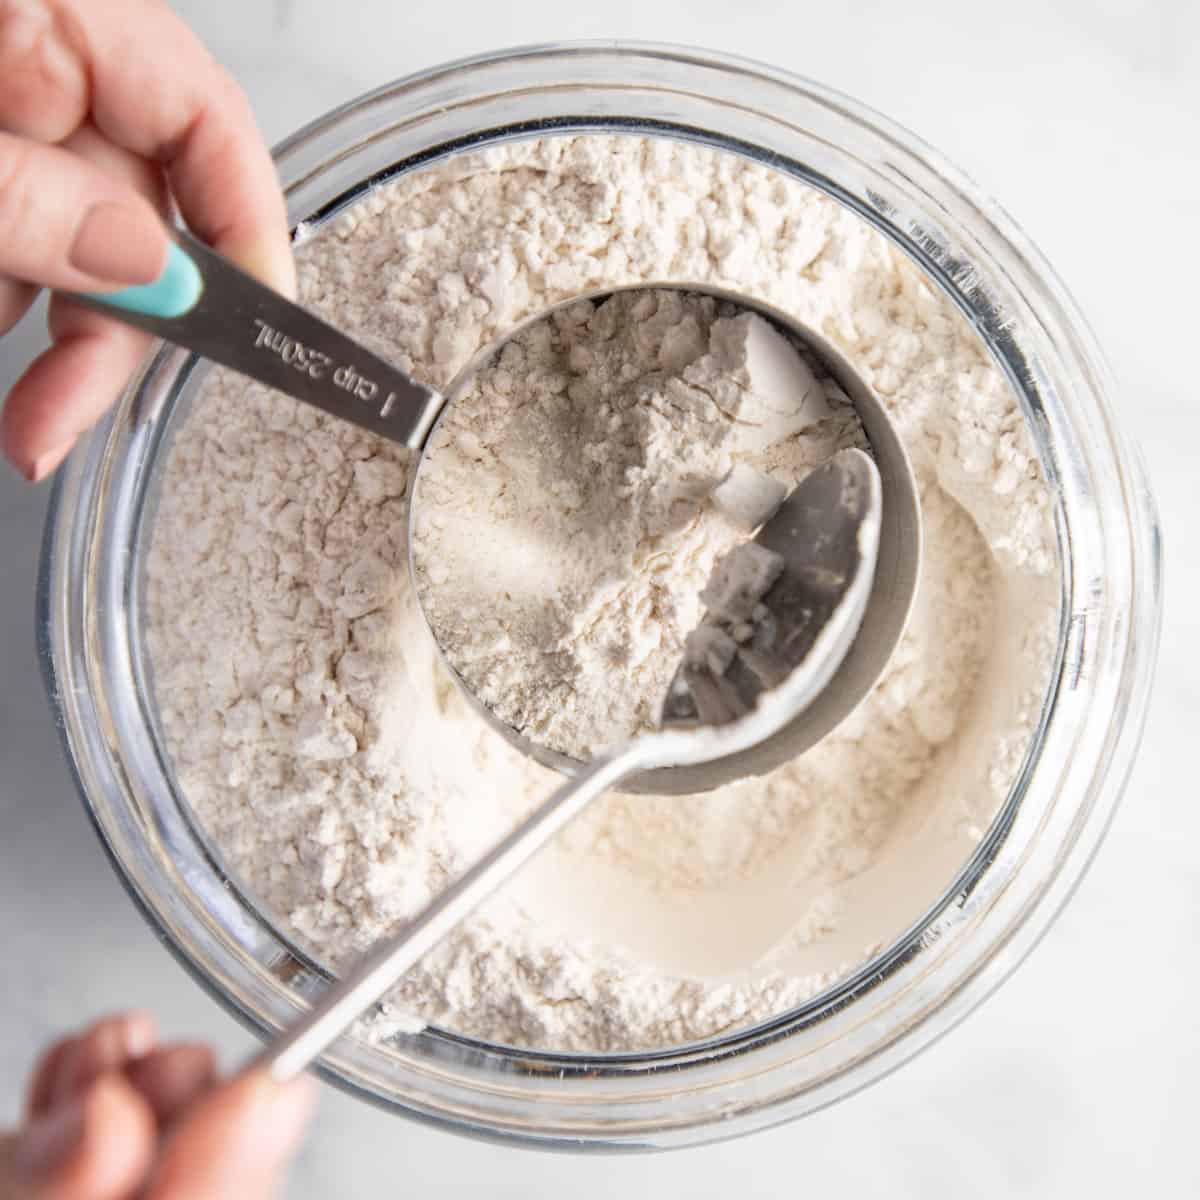 Good Question: Help Me Find a Flour Container